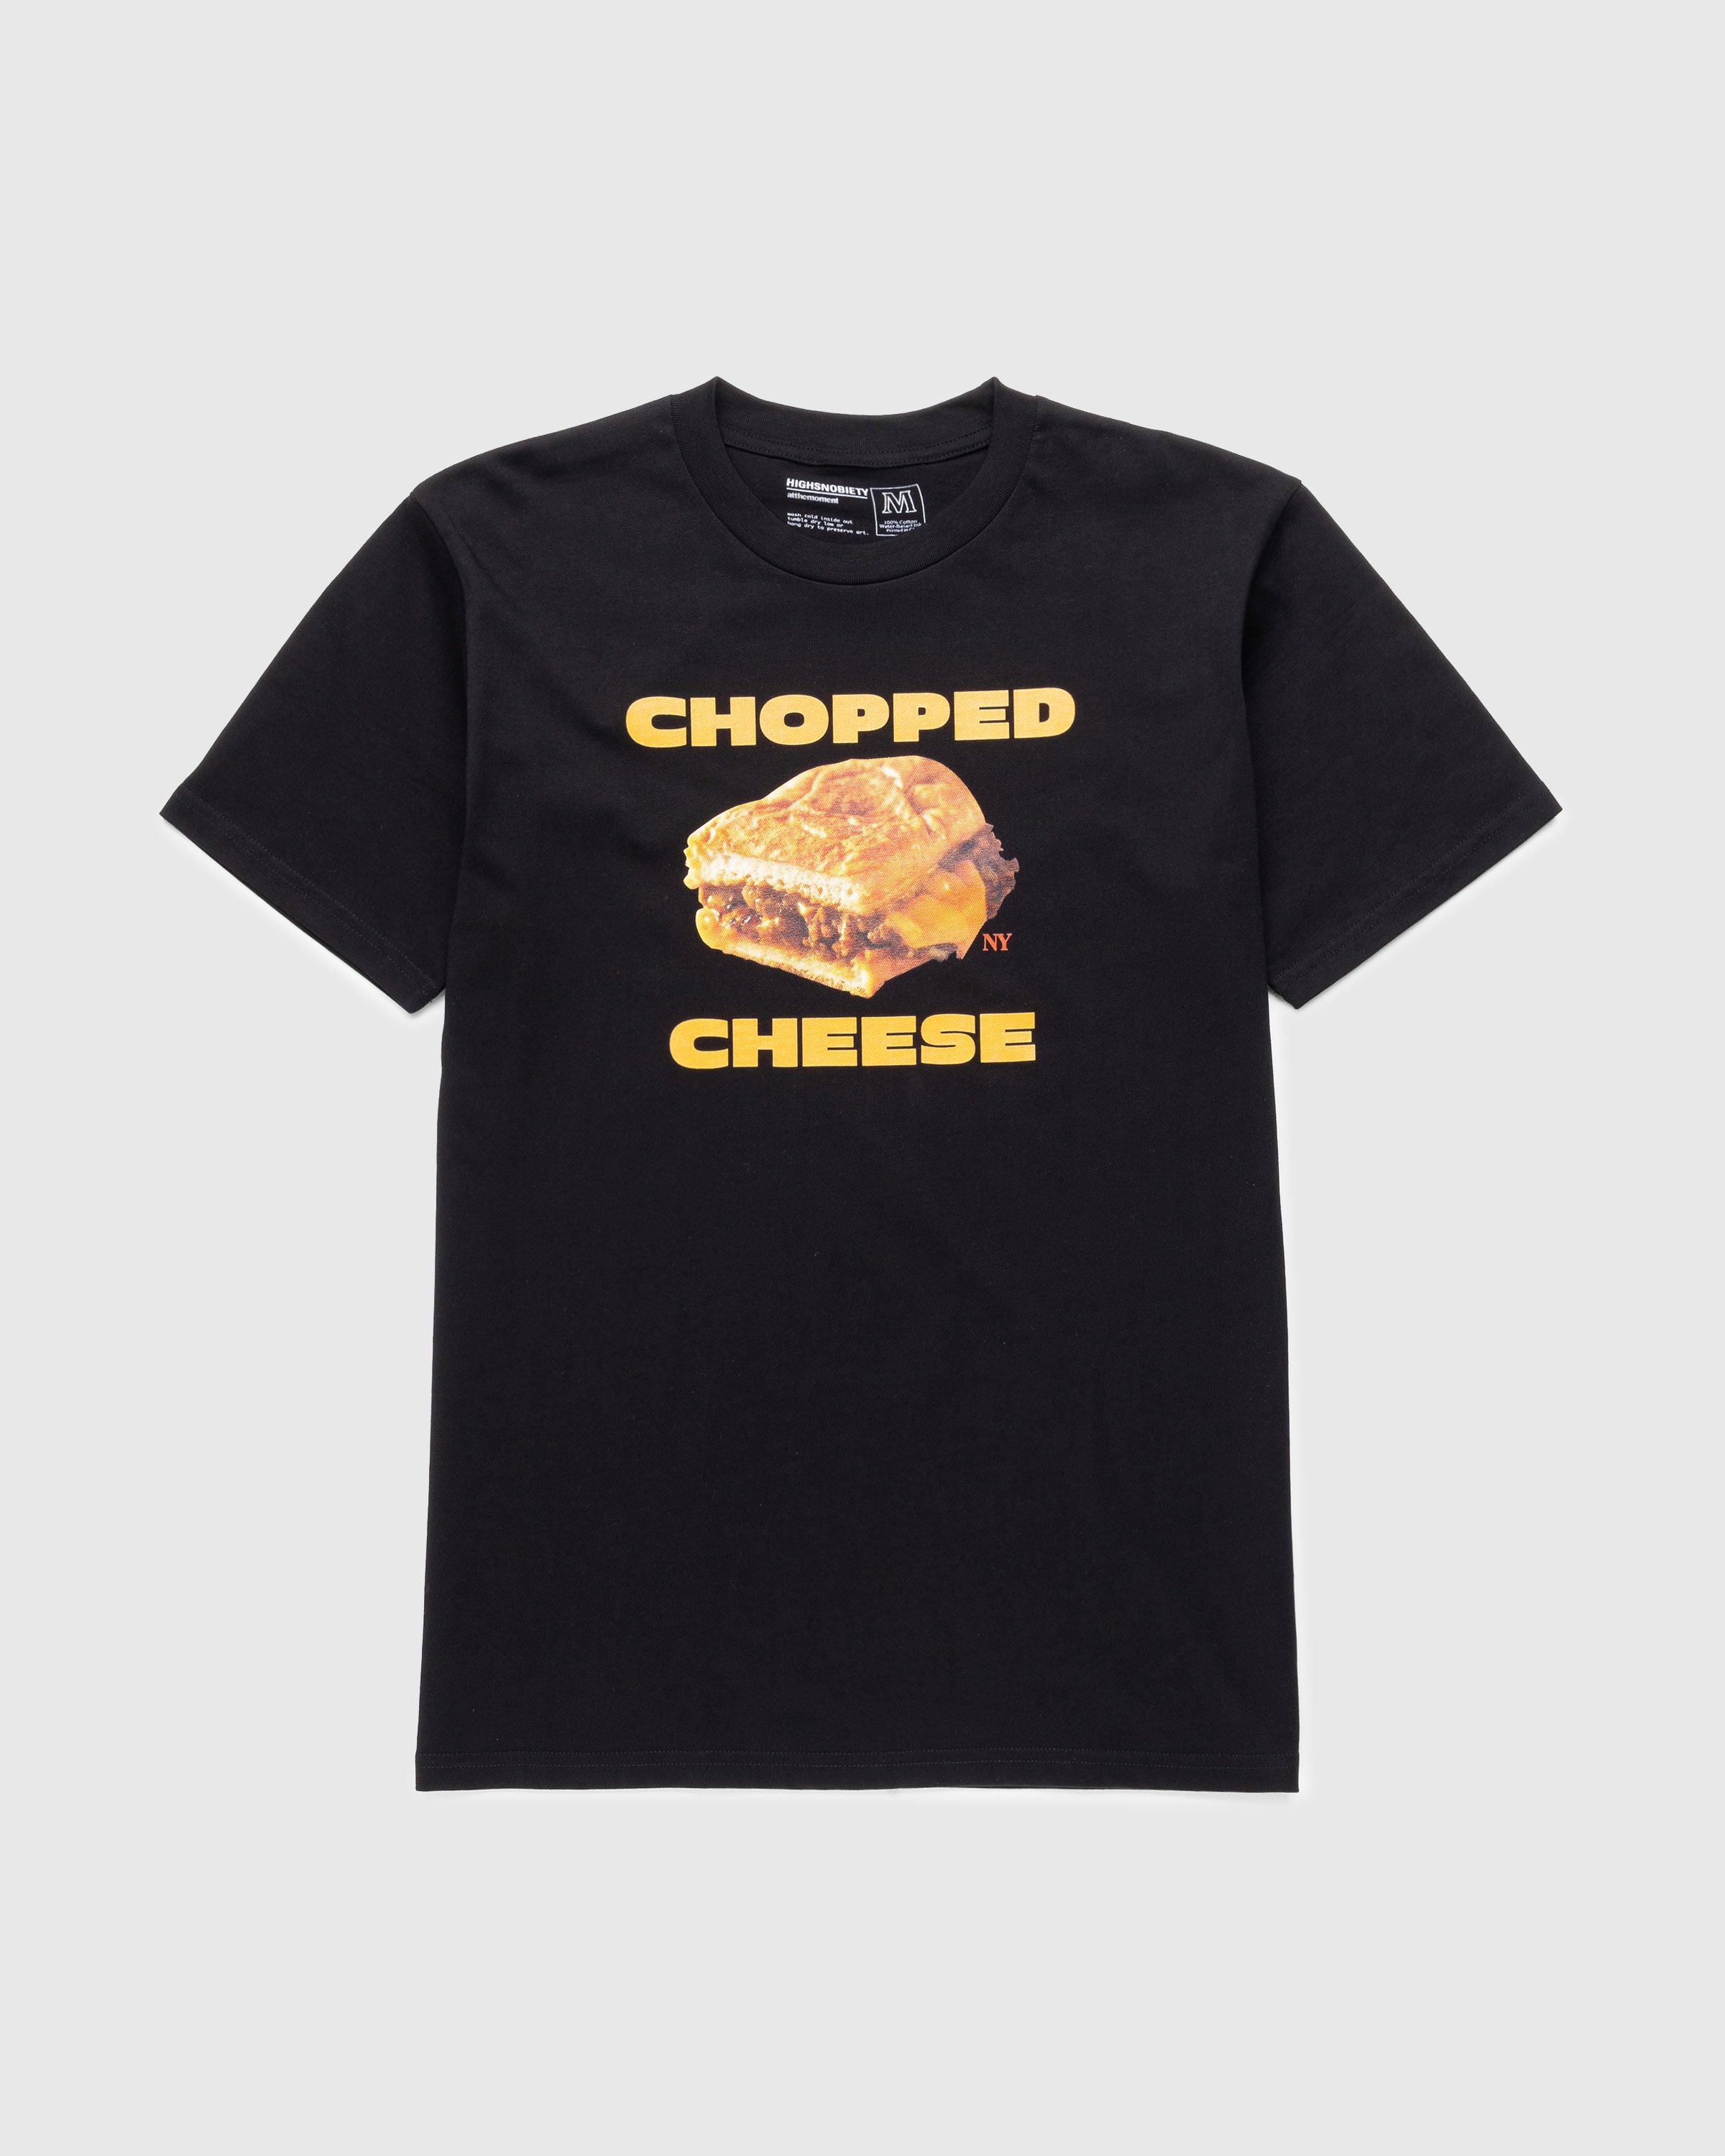 At The Moment x Highsnobiety - Chopped Cheese T-Shirt - Clothing - Black - Image 1